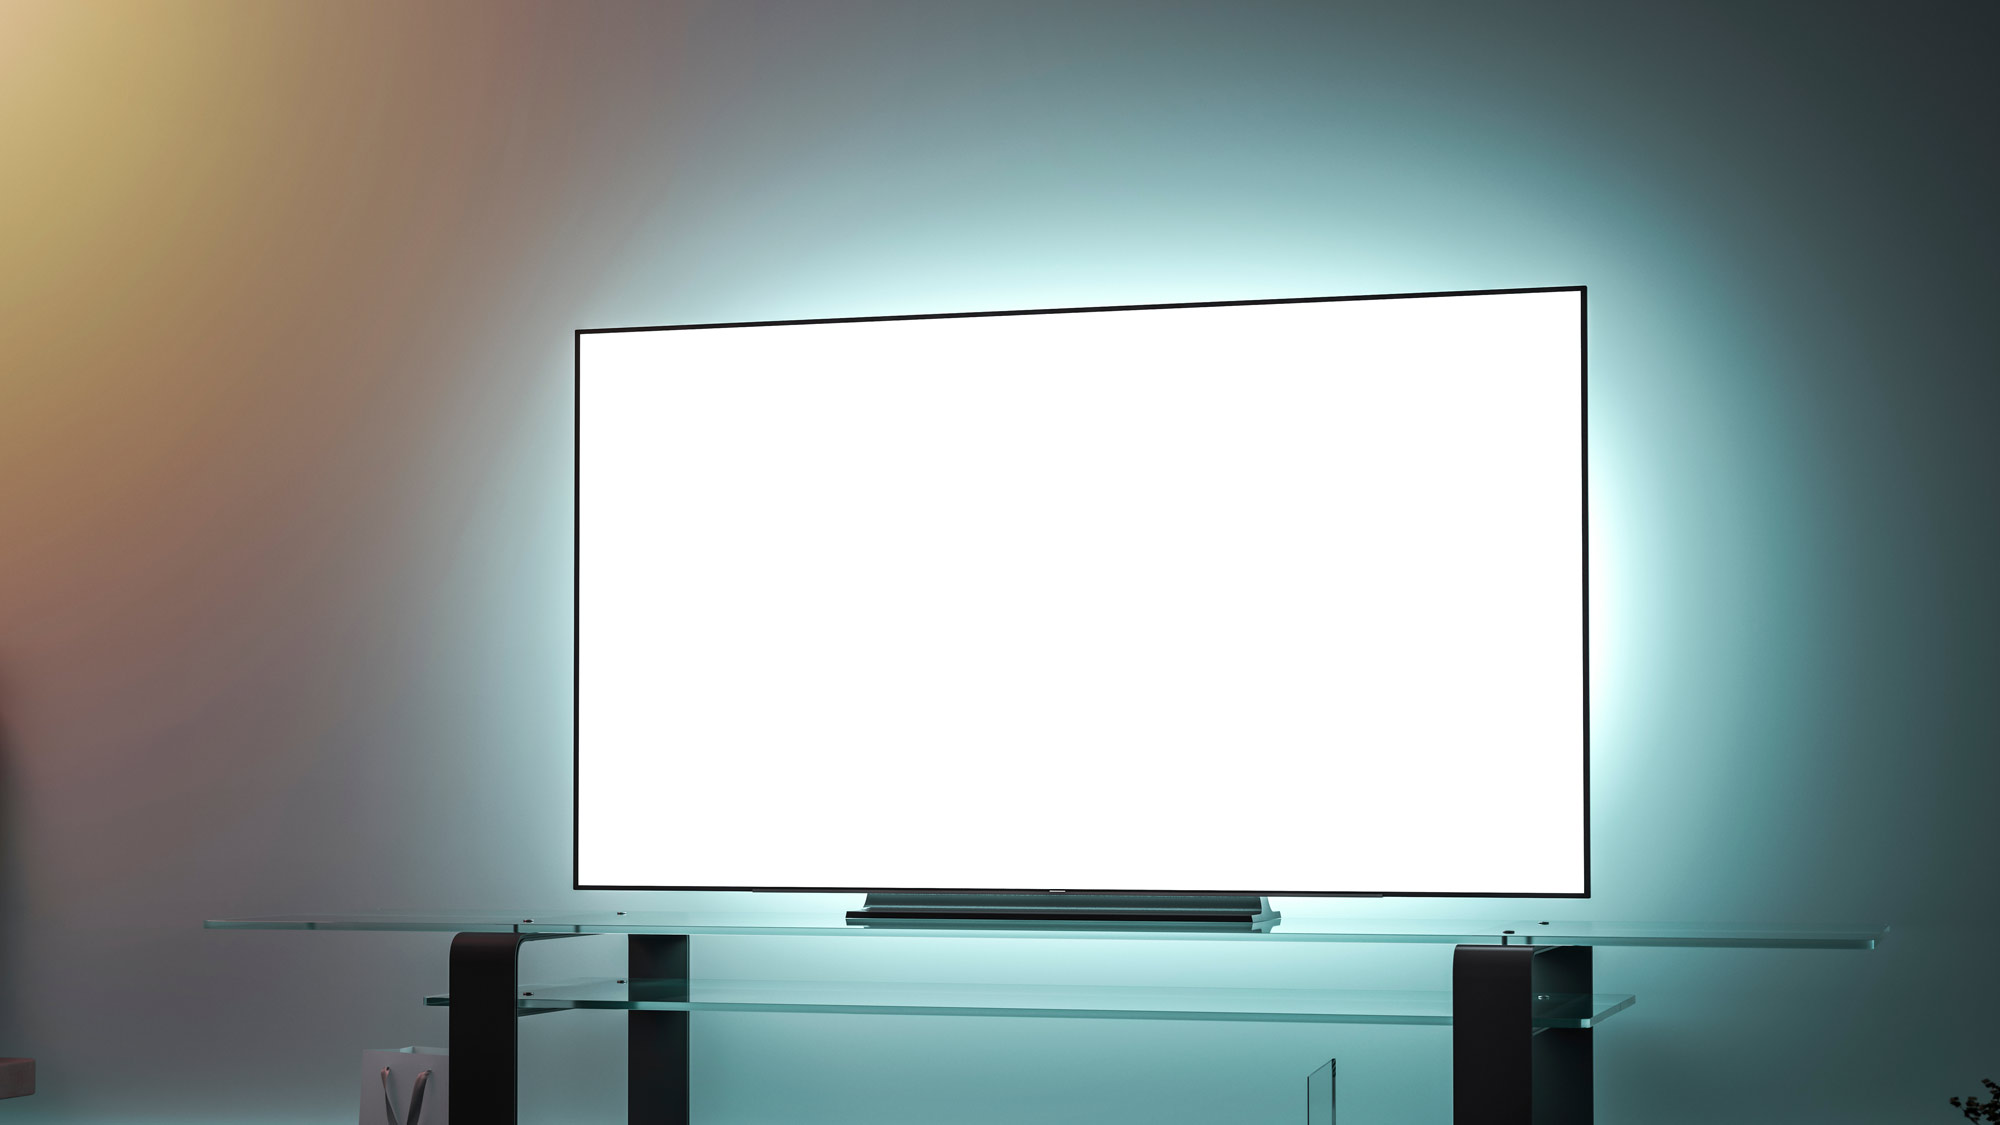 Everything There Is To Know About The Edge-Lit LED TV